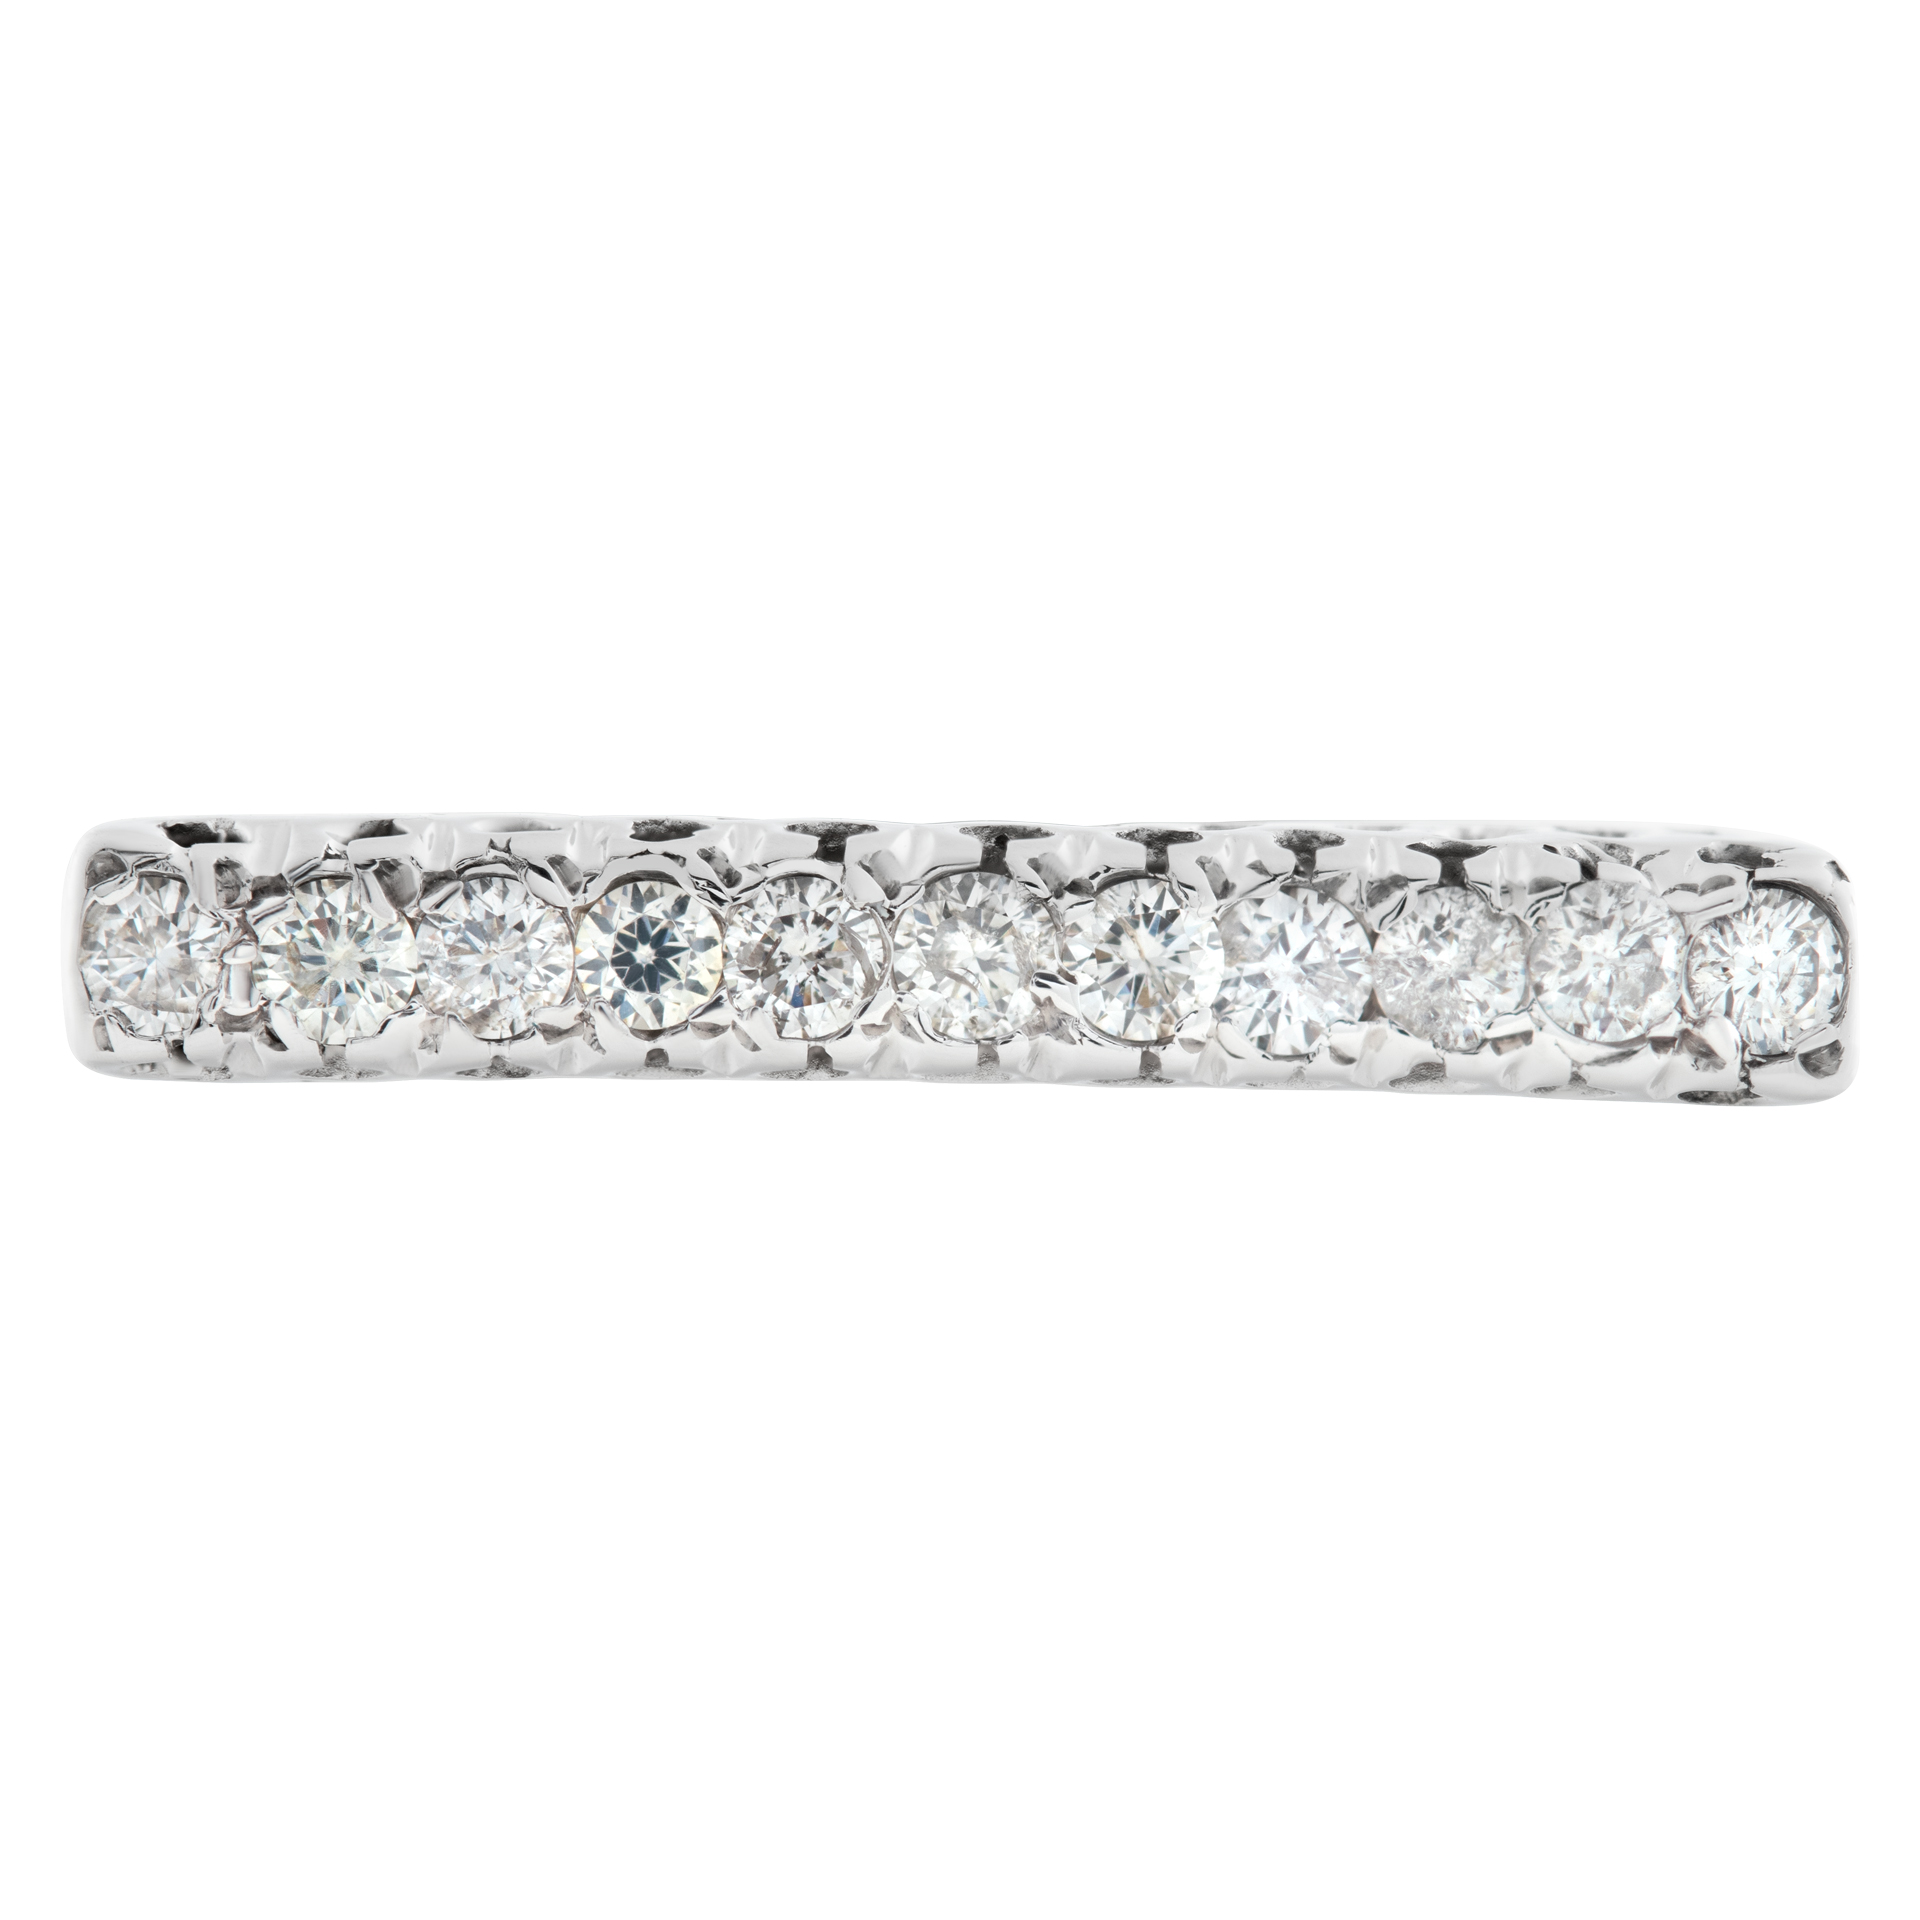 Single row diamond ring in 18k white gold. 0.33 carat (I-J color, SI1 clarity). Size 8 image 2